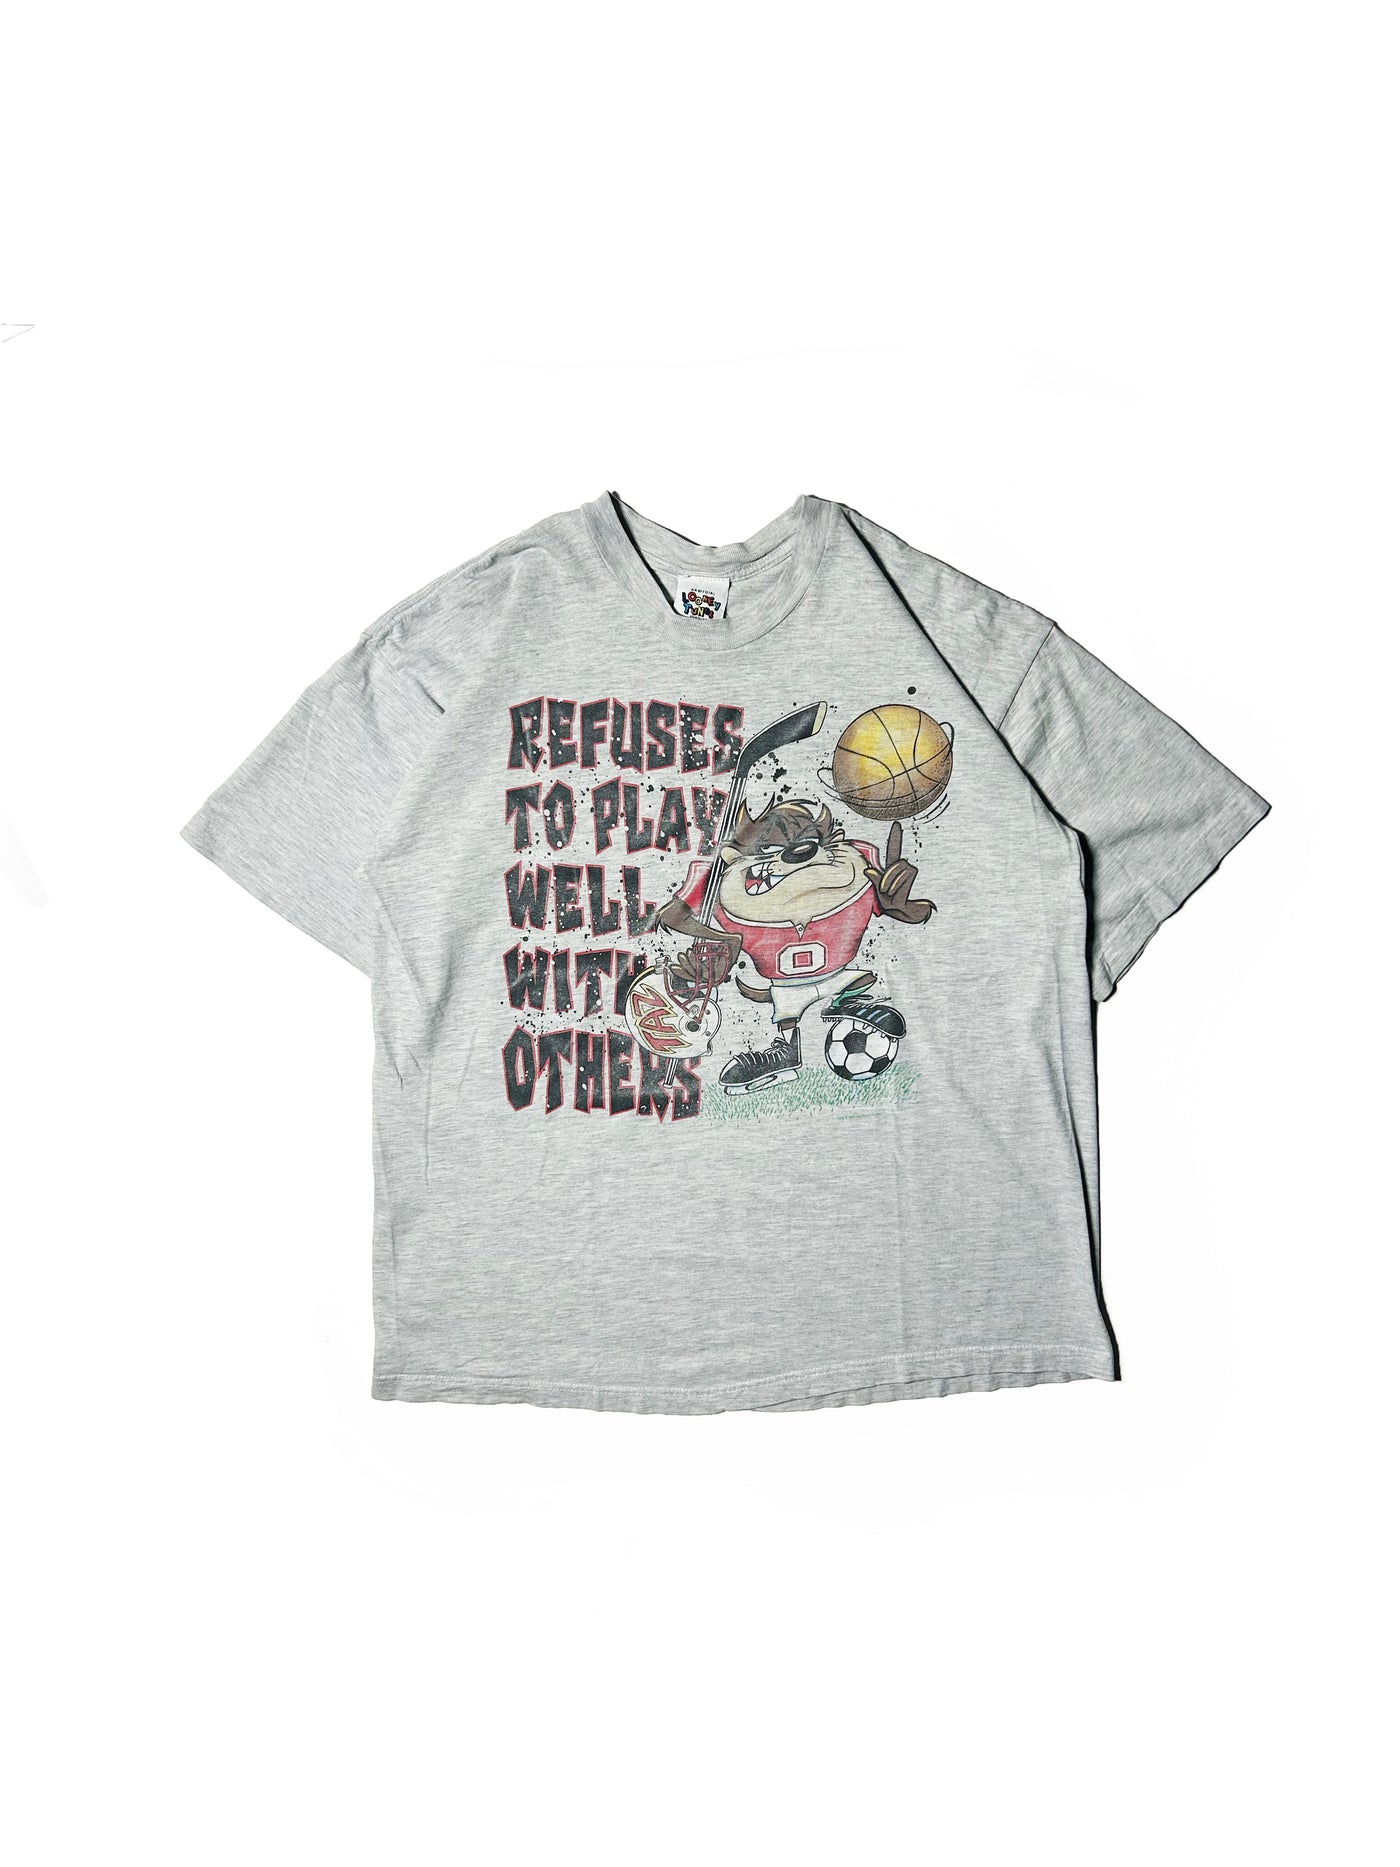 Vintage 1997 Taz 'Refuses to Play with Others' T-Shirt